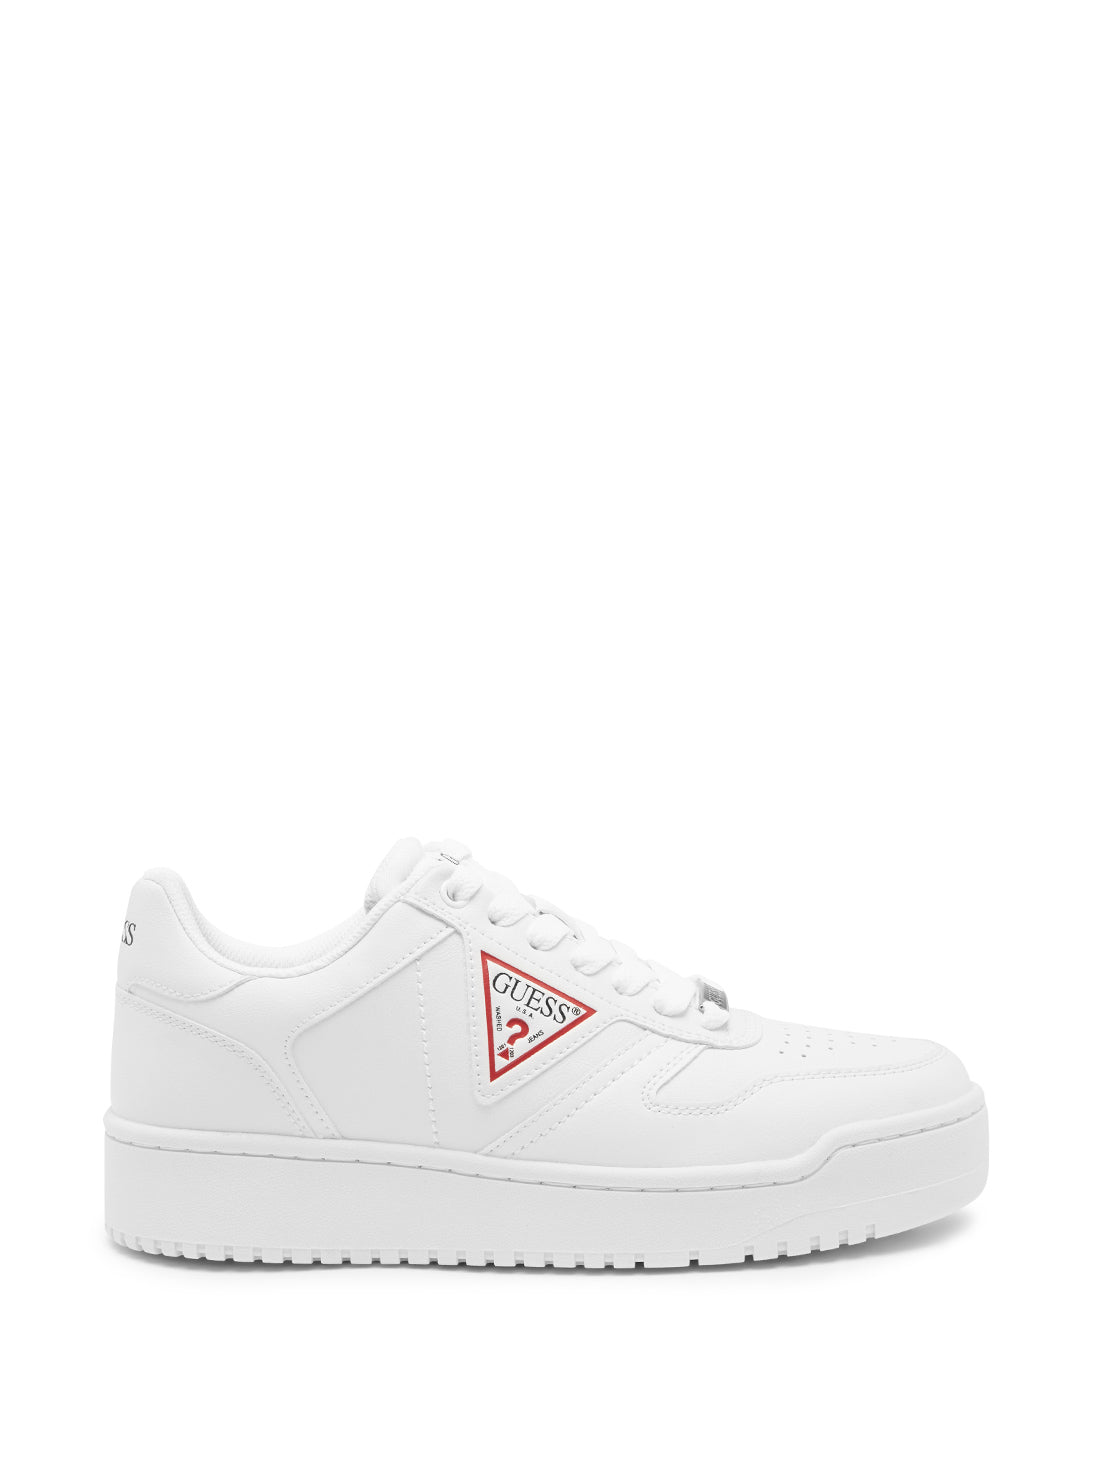 GUESS White Aveni Low-Top Sneakers side view